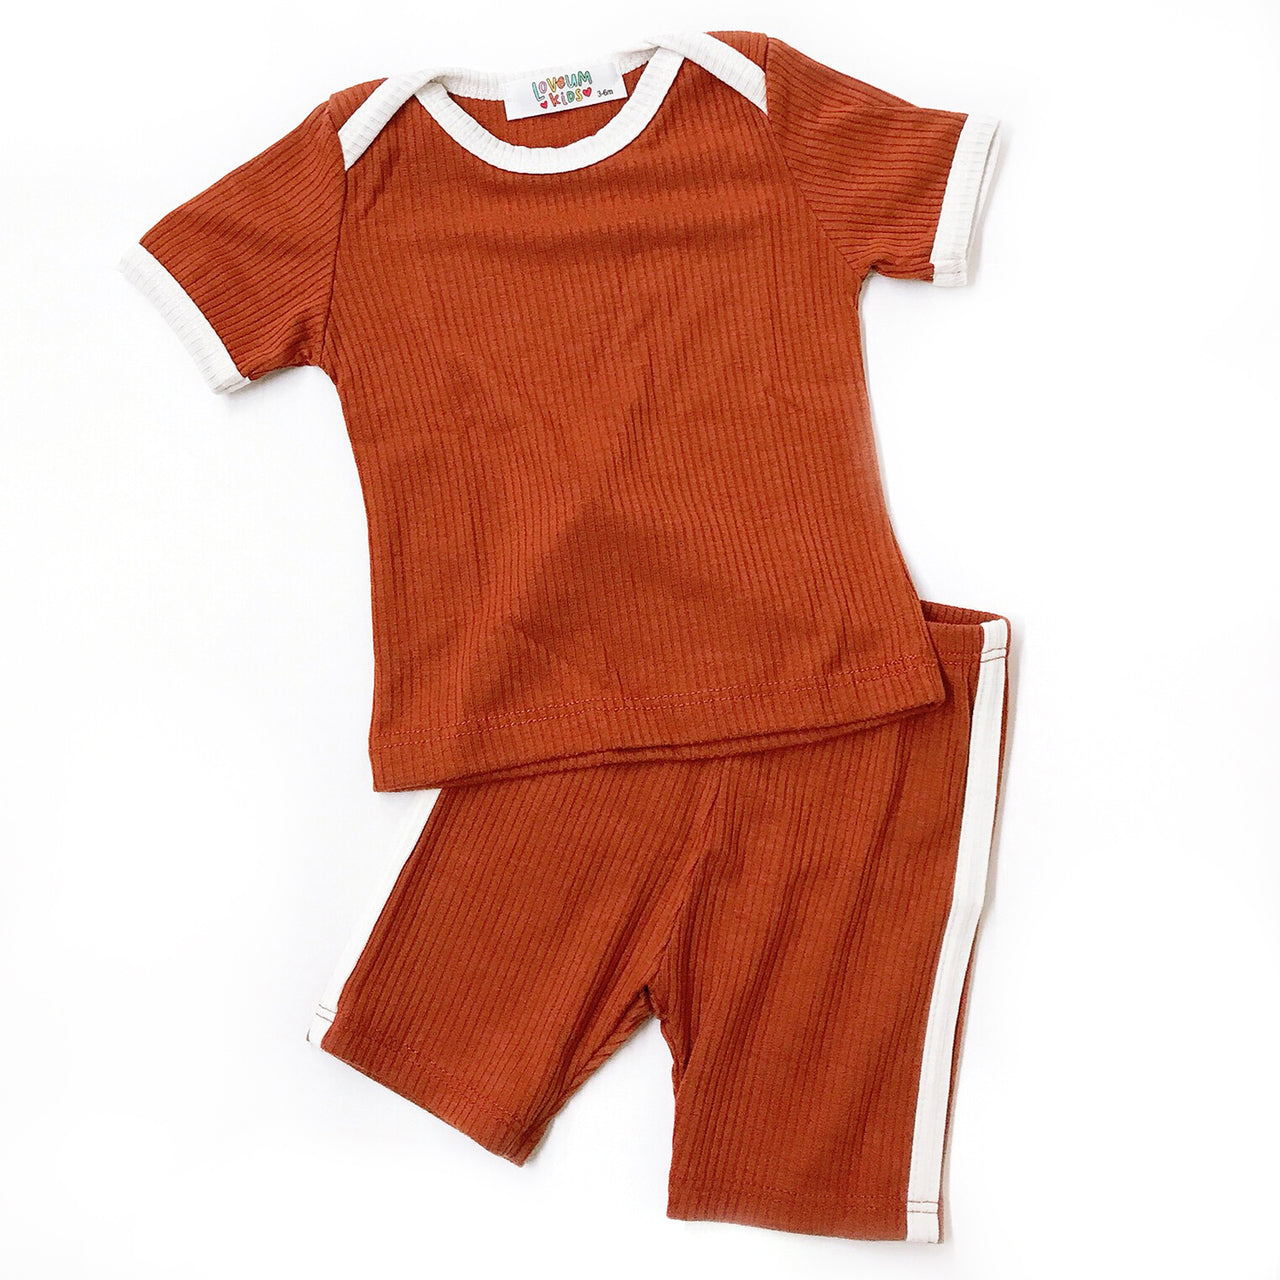 SpearmintLOVE’s baby Ribbed 2-Piece Outfit, Rust